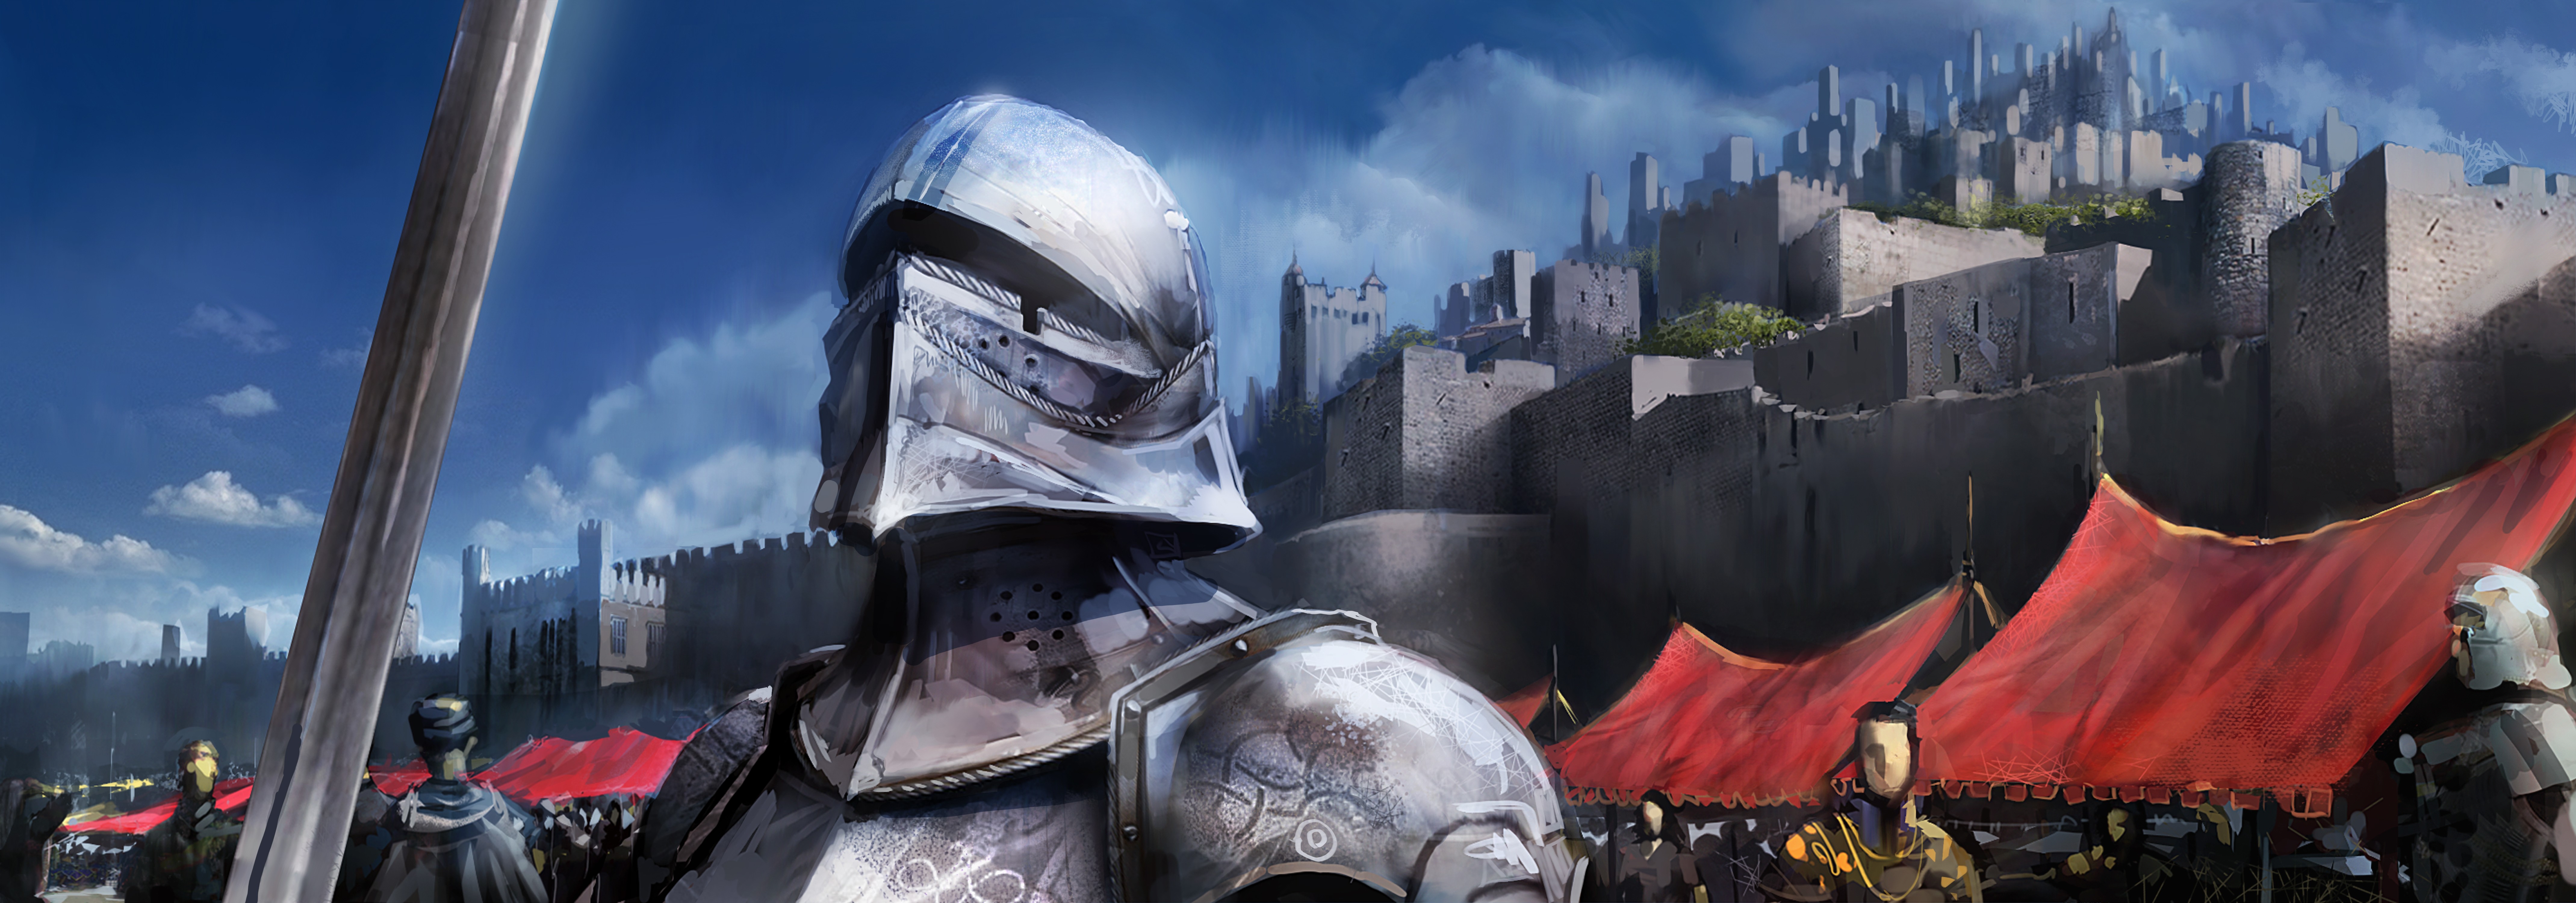 Knight Castle Guards Armor Medieval Silver Shiny 8558x3000